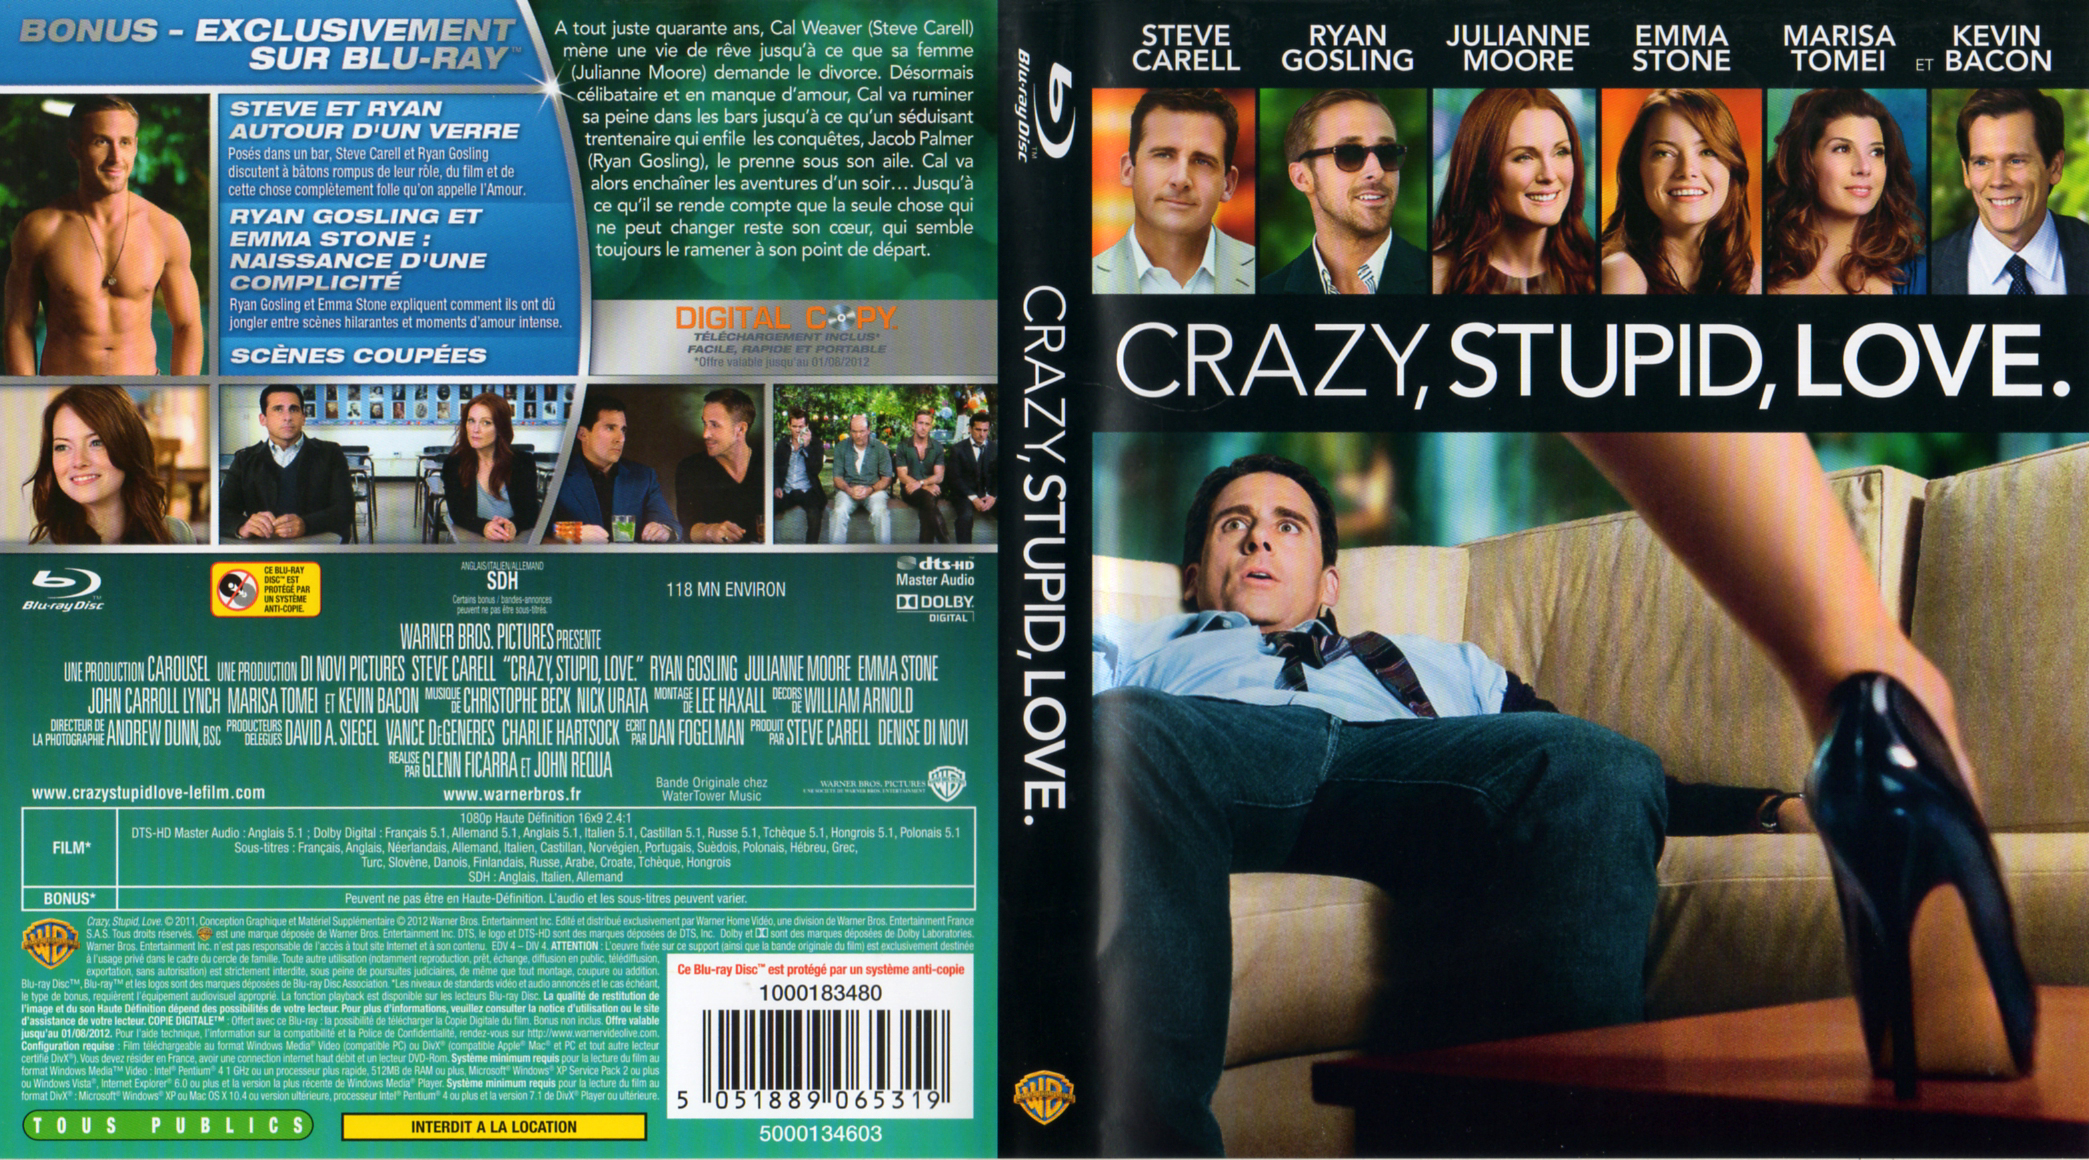 Jaquette DVD Crazy, Stupid, Love (BLU-RAY)